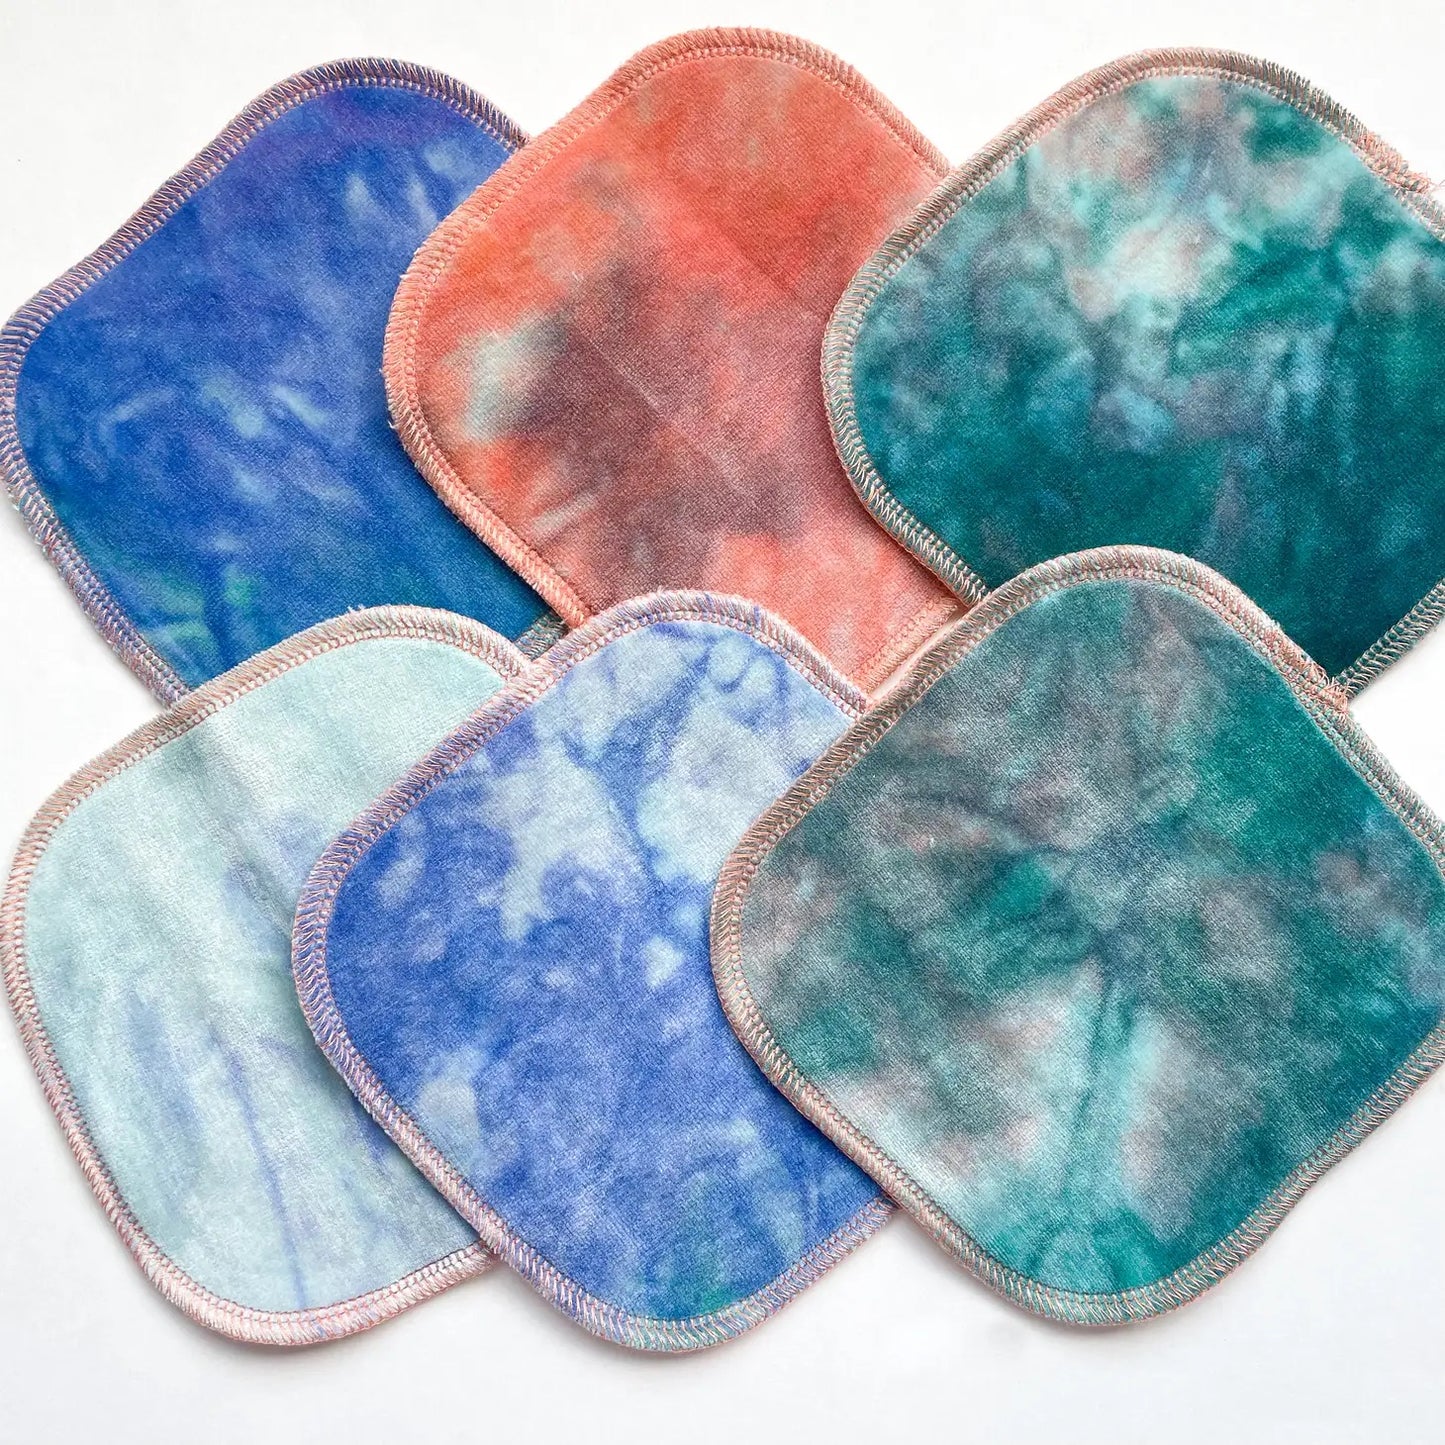 hand-dyed organic wipes in unicorn